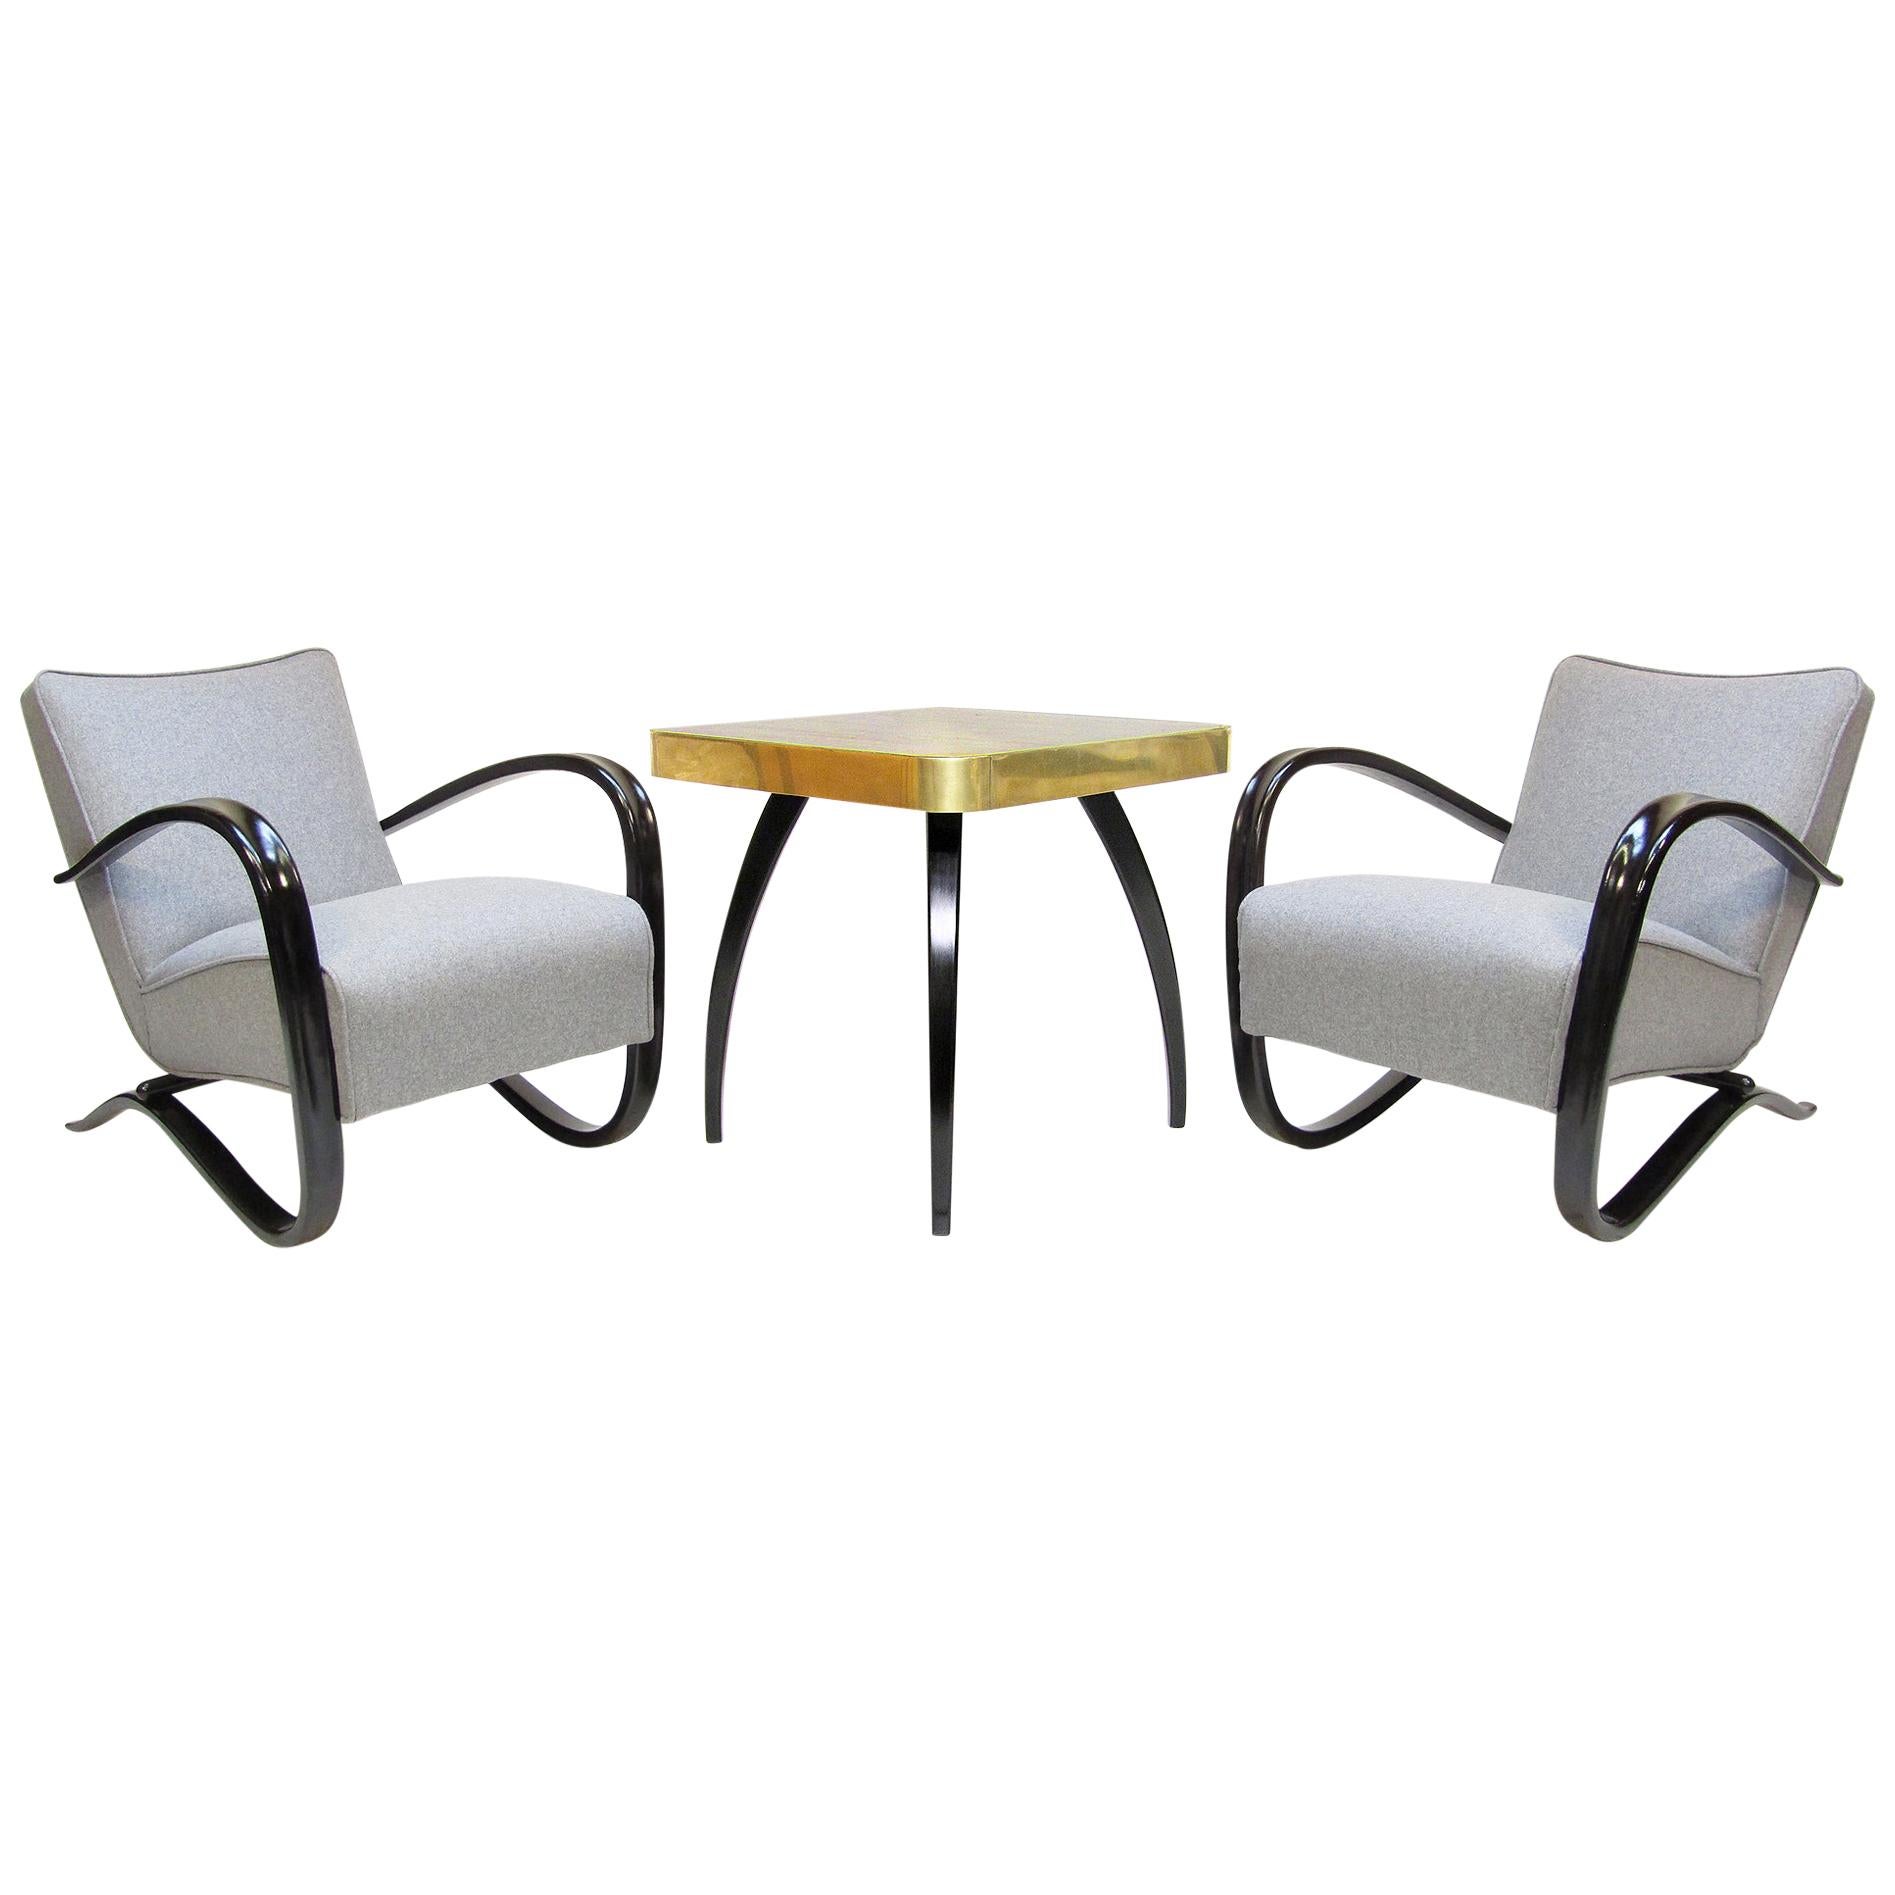 Two H269 Art Deco Lounge Chairs with Brass Spider Table Set by Jindrich Halabala